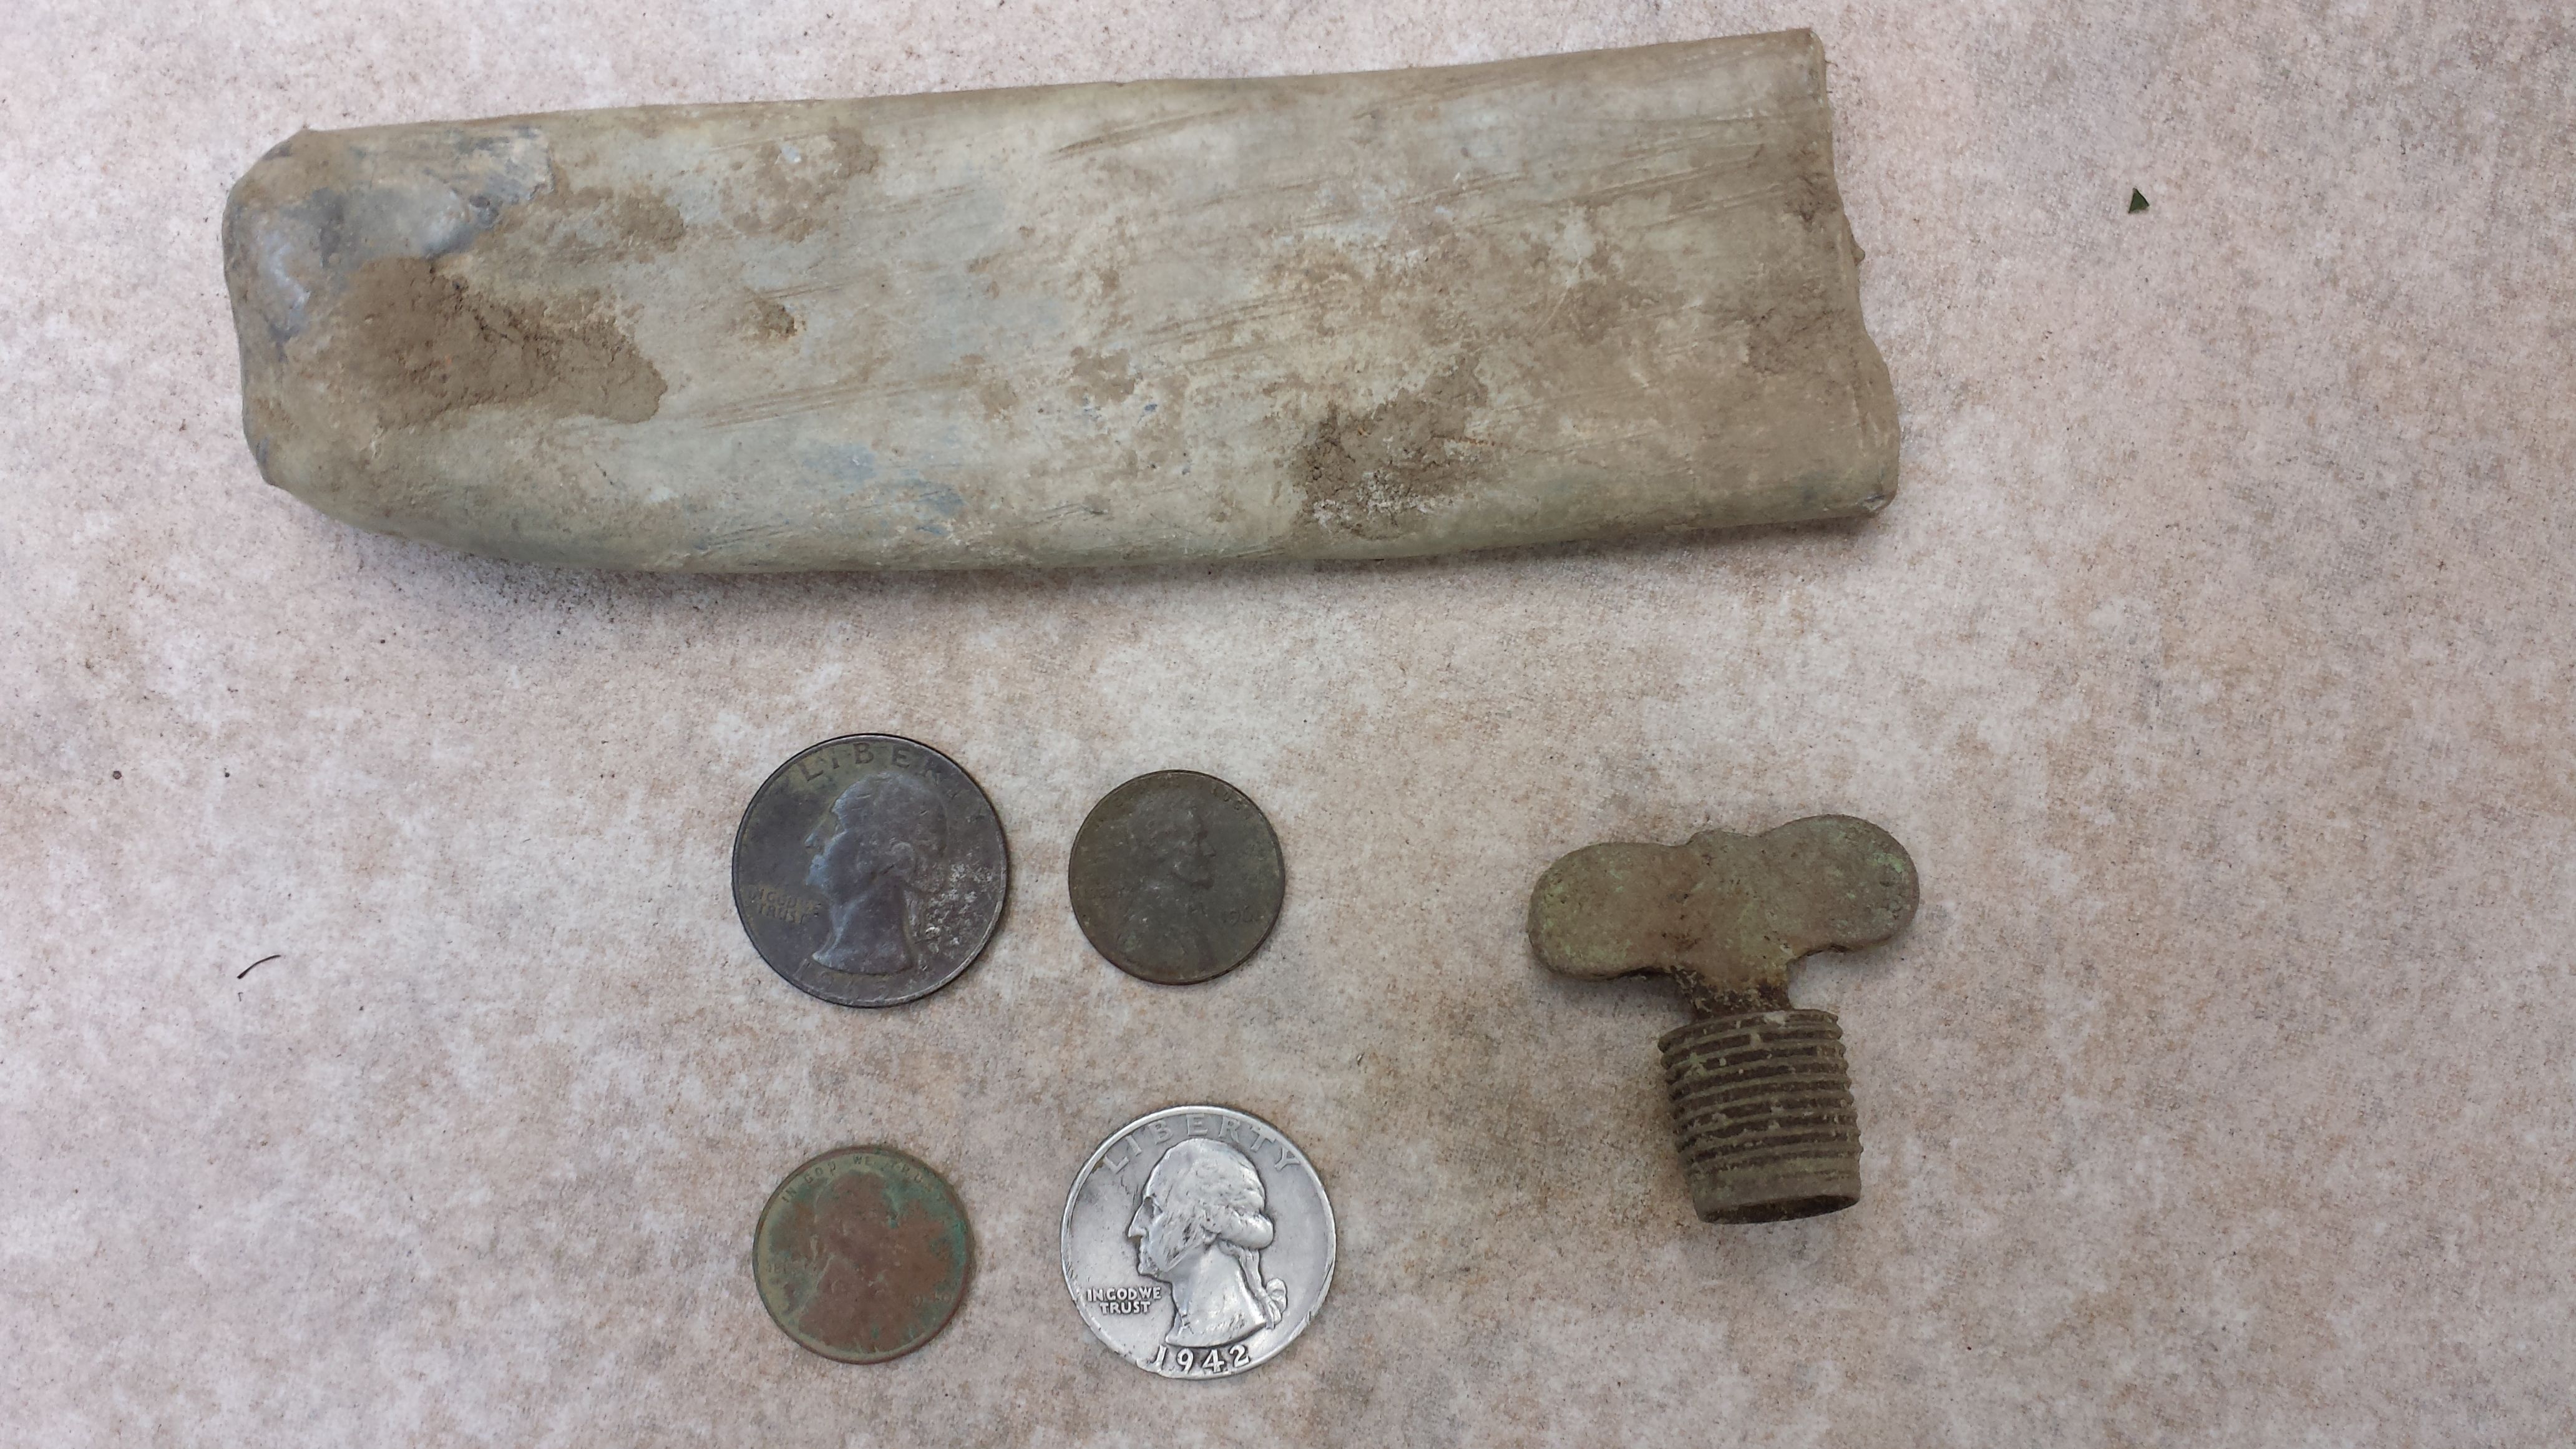 20150515 170332  Oberlin Old orphanage site.  1940 wheat and 1942 quarter.  $0.52  2 hr